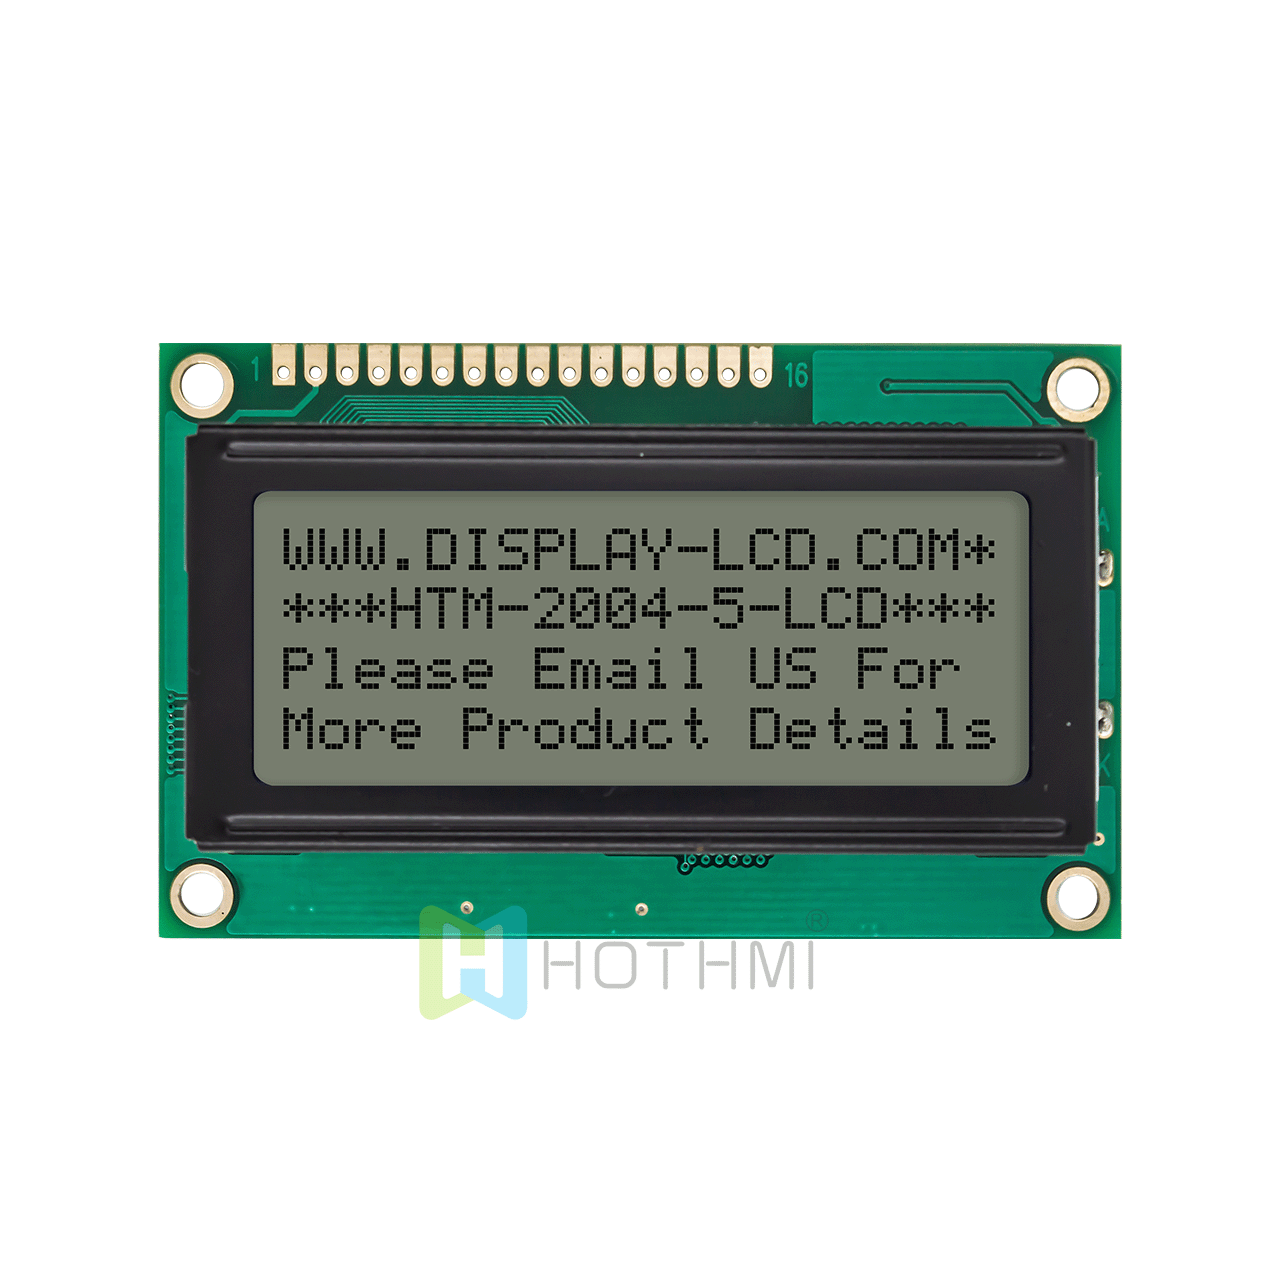 3.3v/5.0v/4X20 monochrome character LCD module/FSTN positive display/white backlight/white background with gray characters/Arduino/transflective LCD display